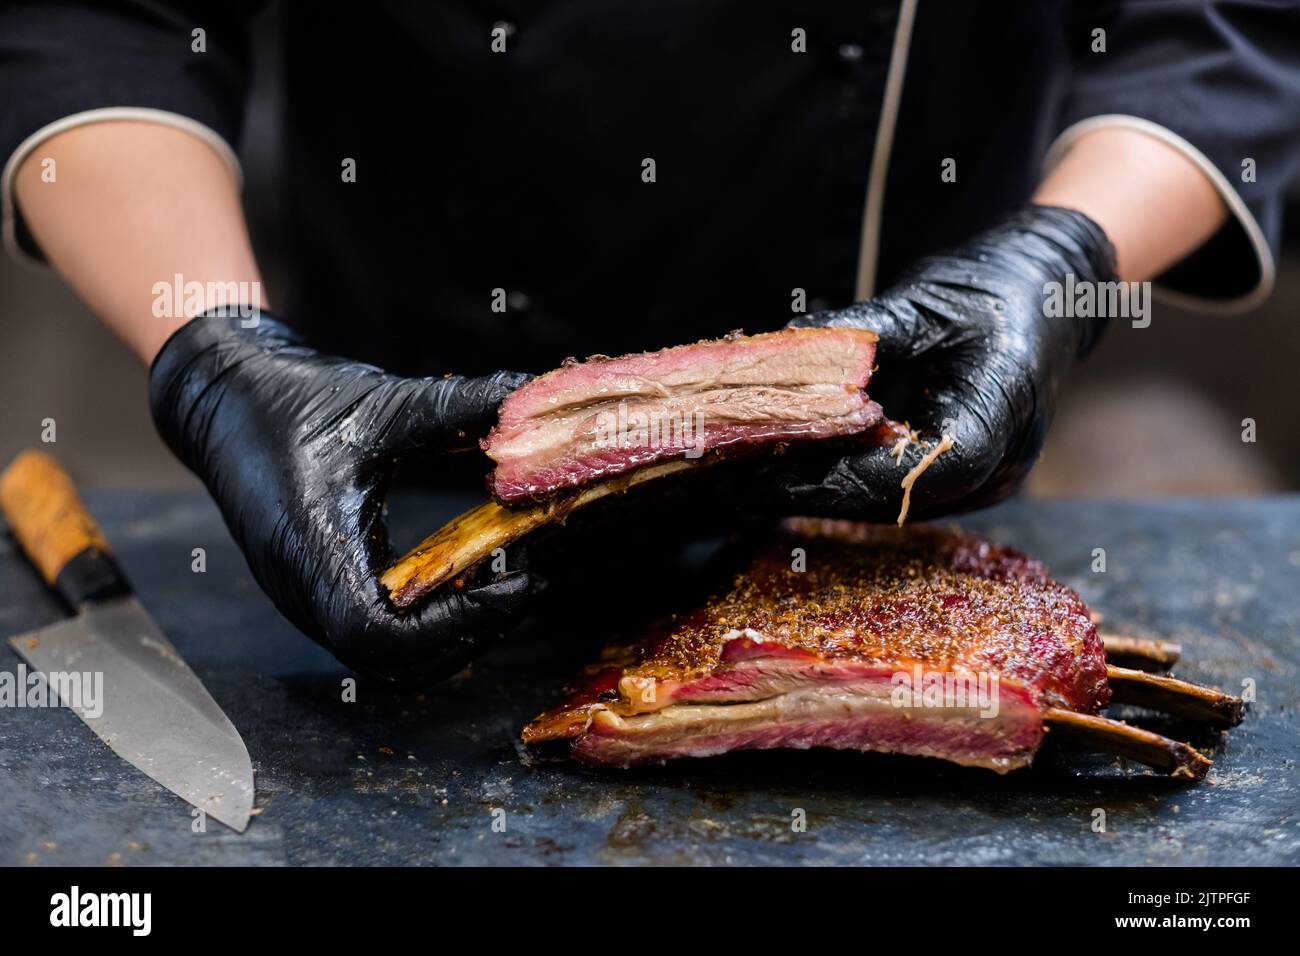 grill restaurant kitchen chef smoked beef ribs Stock Photo